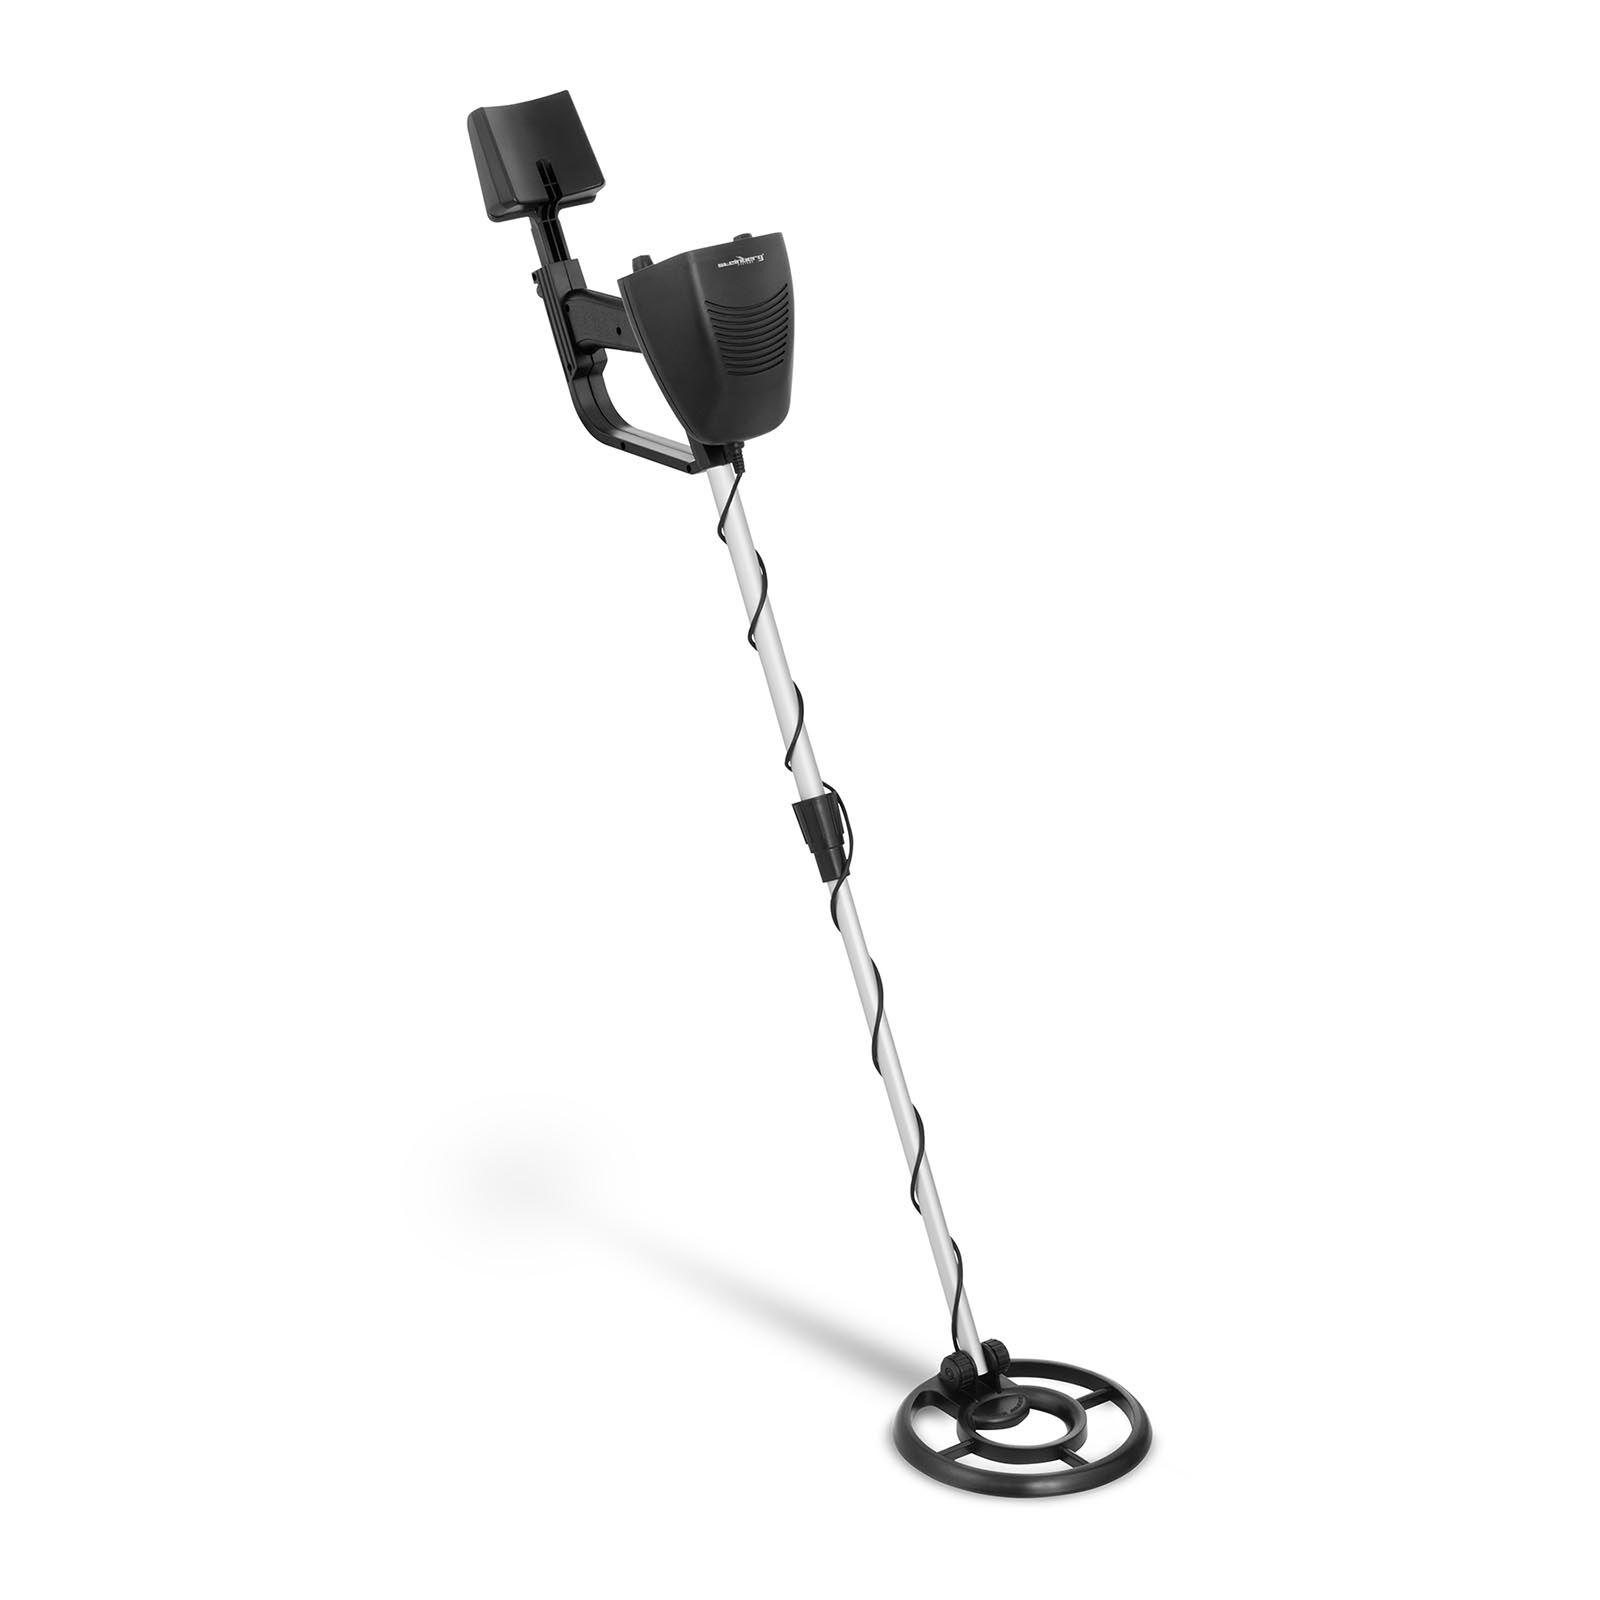 Steinberg Systems Factory seconds Professional Metal Detector - 100 cm / 15 cm - Ø 19 SBS-MD-8